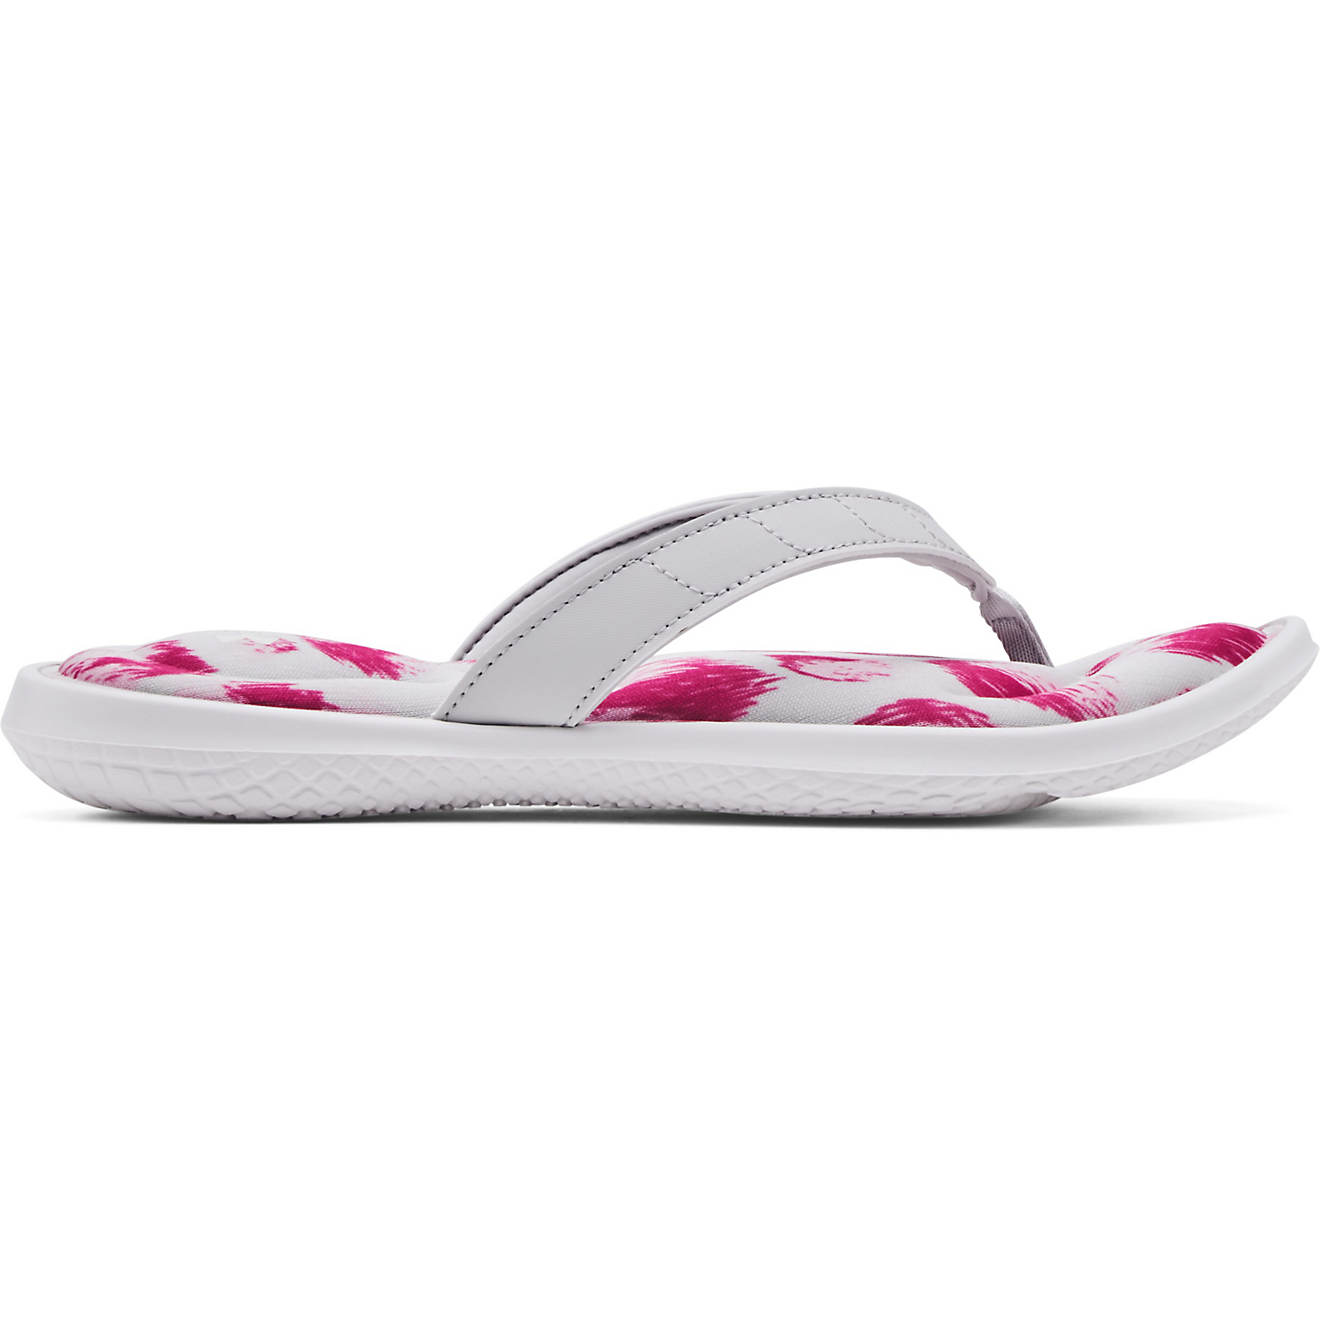 Under Armour Women’s Marbella VII Graphic FB Sandals                                                                           - view number 1